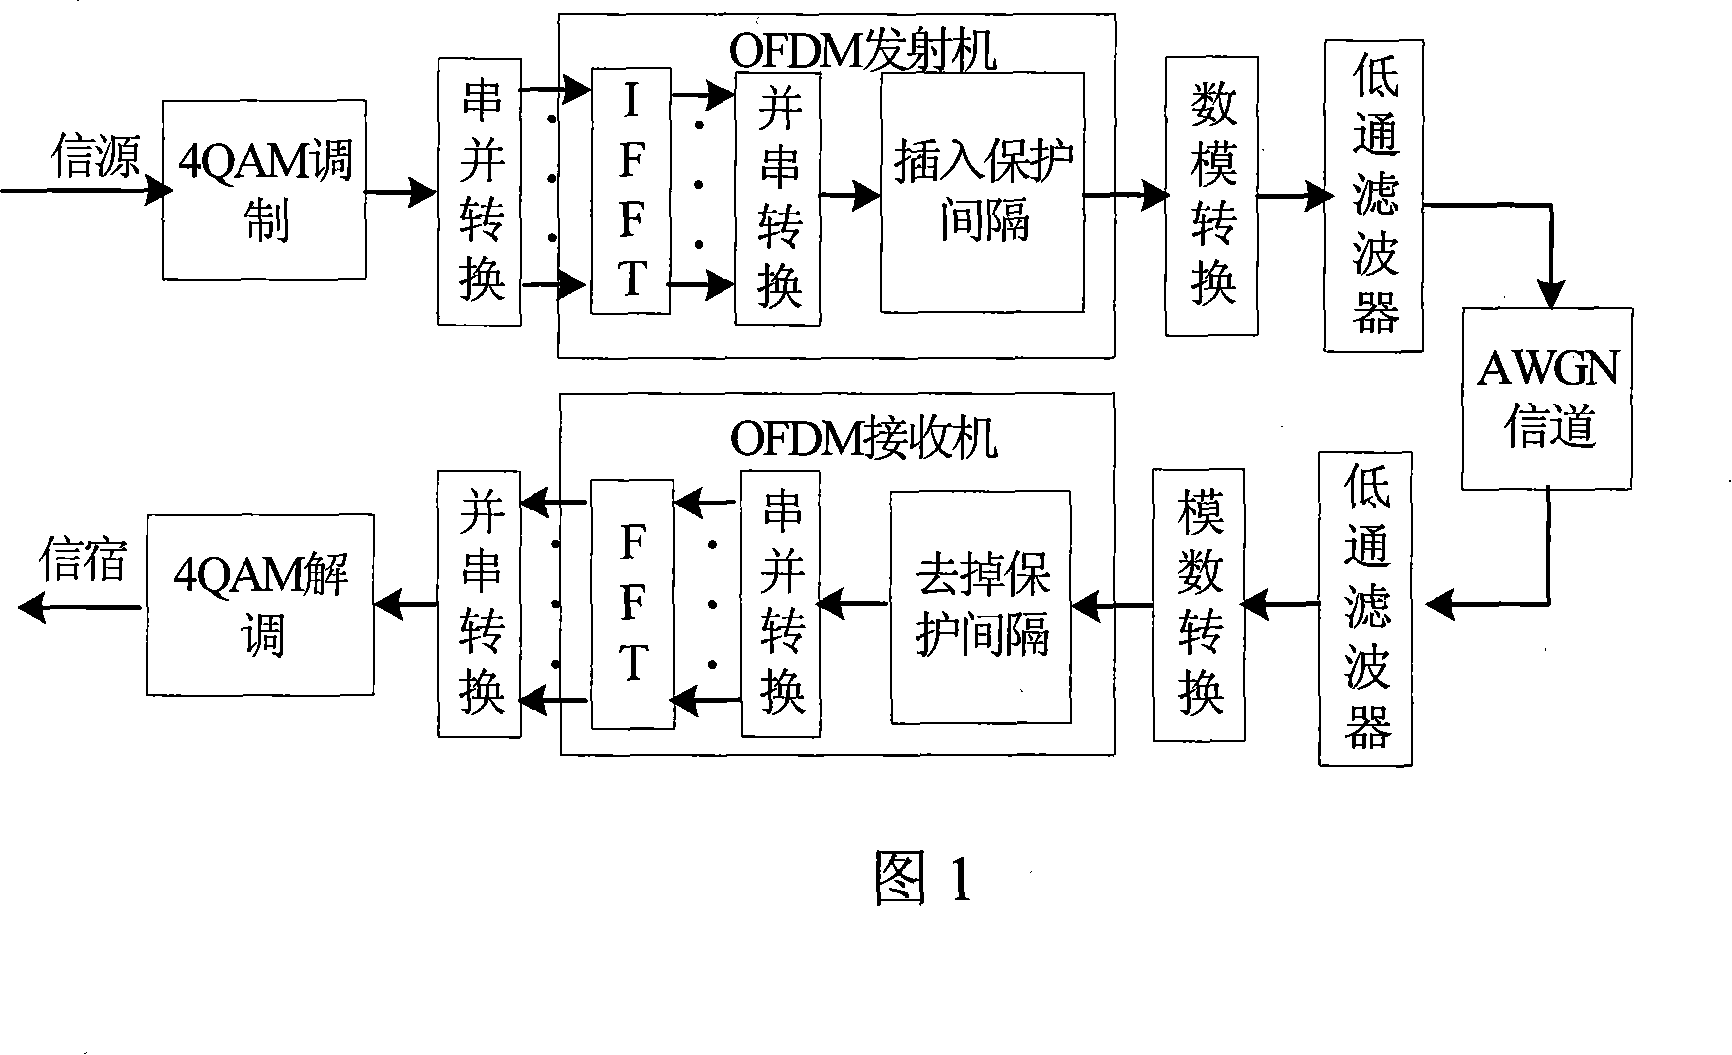 Method for reducing PAPR of OFDM system